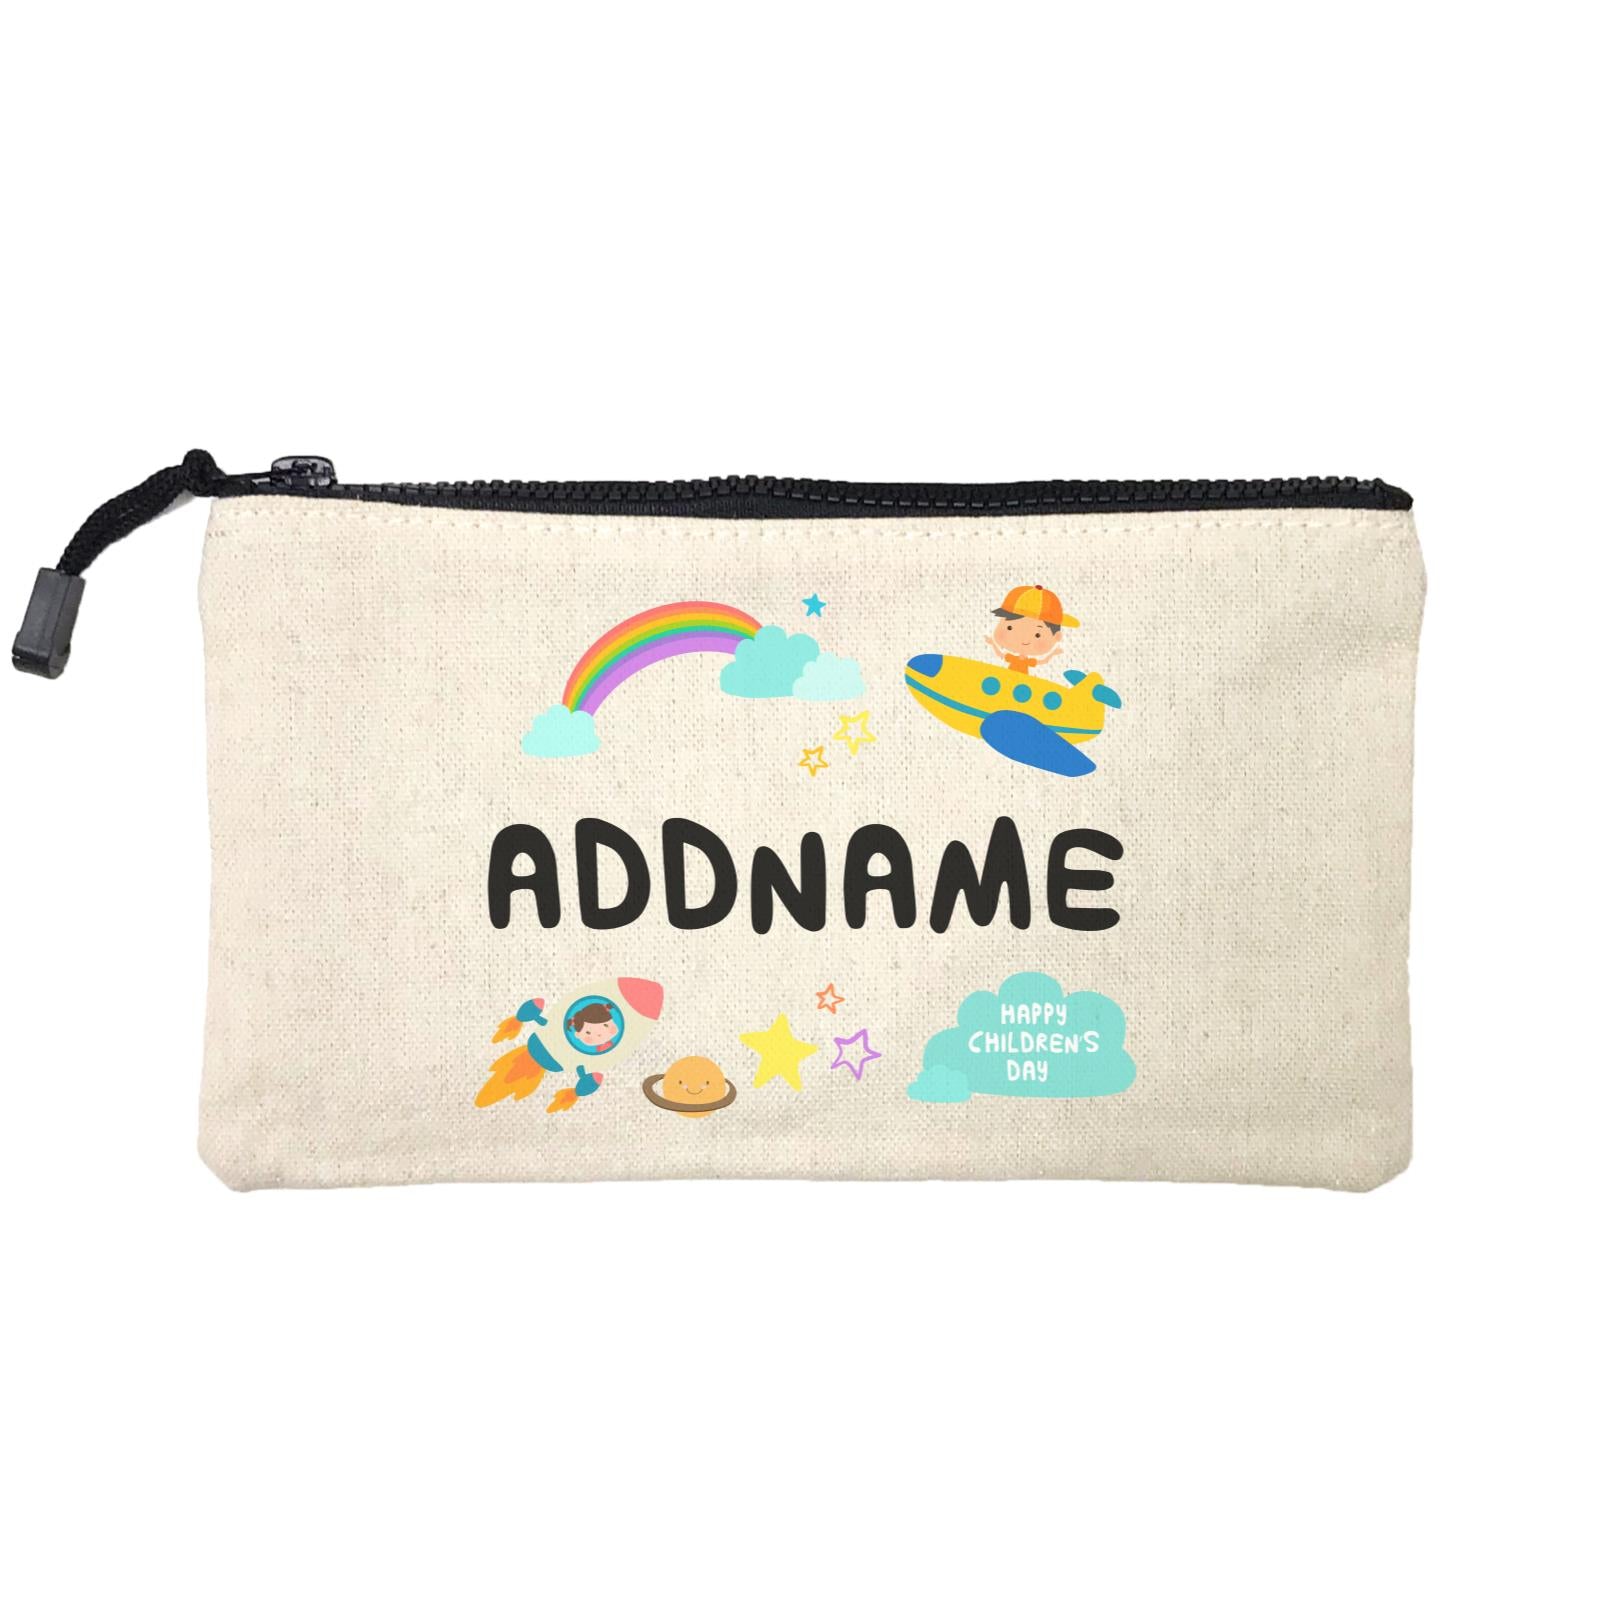 Children's Day Gift Series Adventure Boy Space Rainbow Addname SP Stationery Pouch